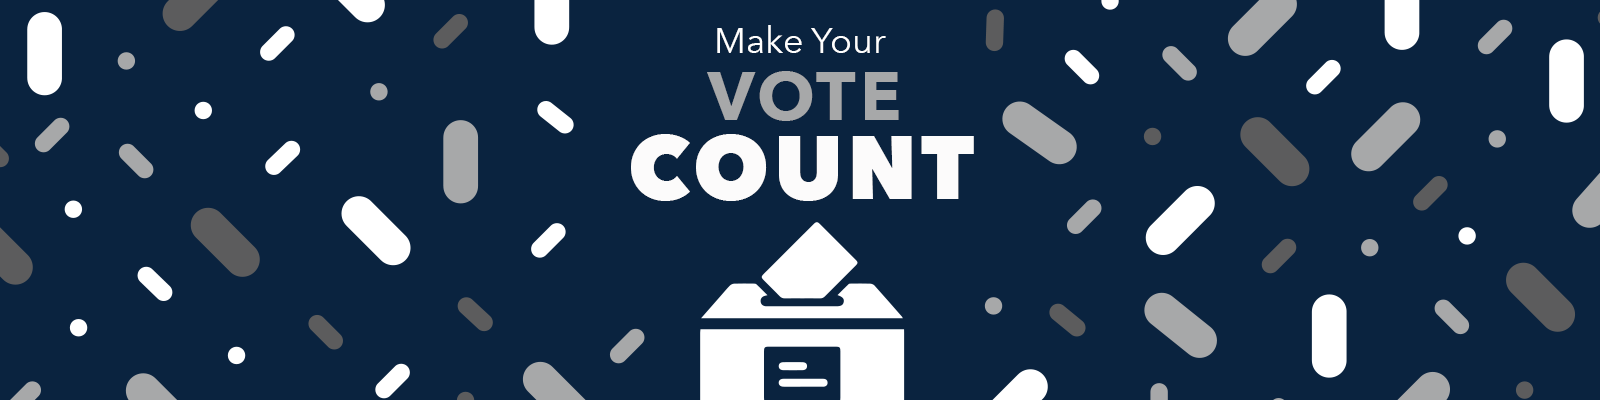 make your vote count with white ballot box confetti in white and gray on navy